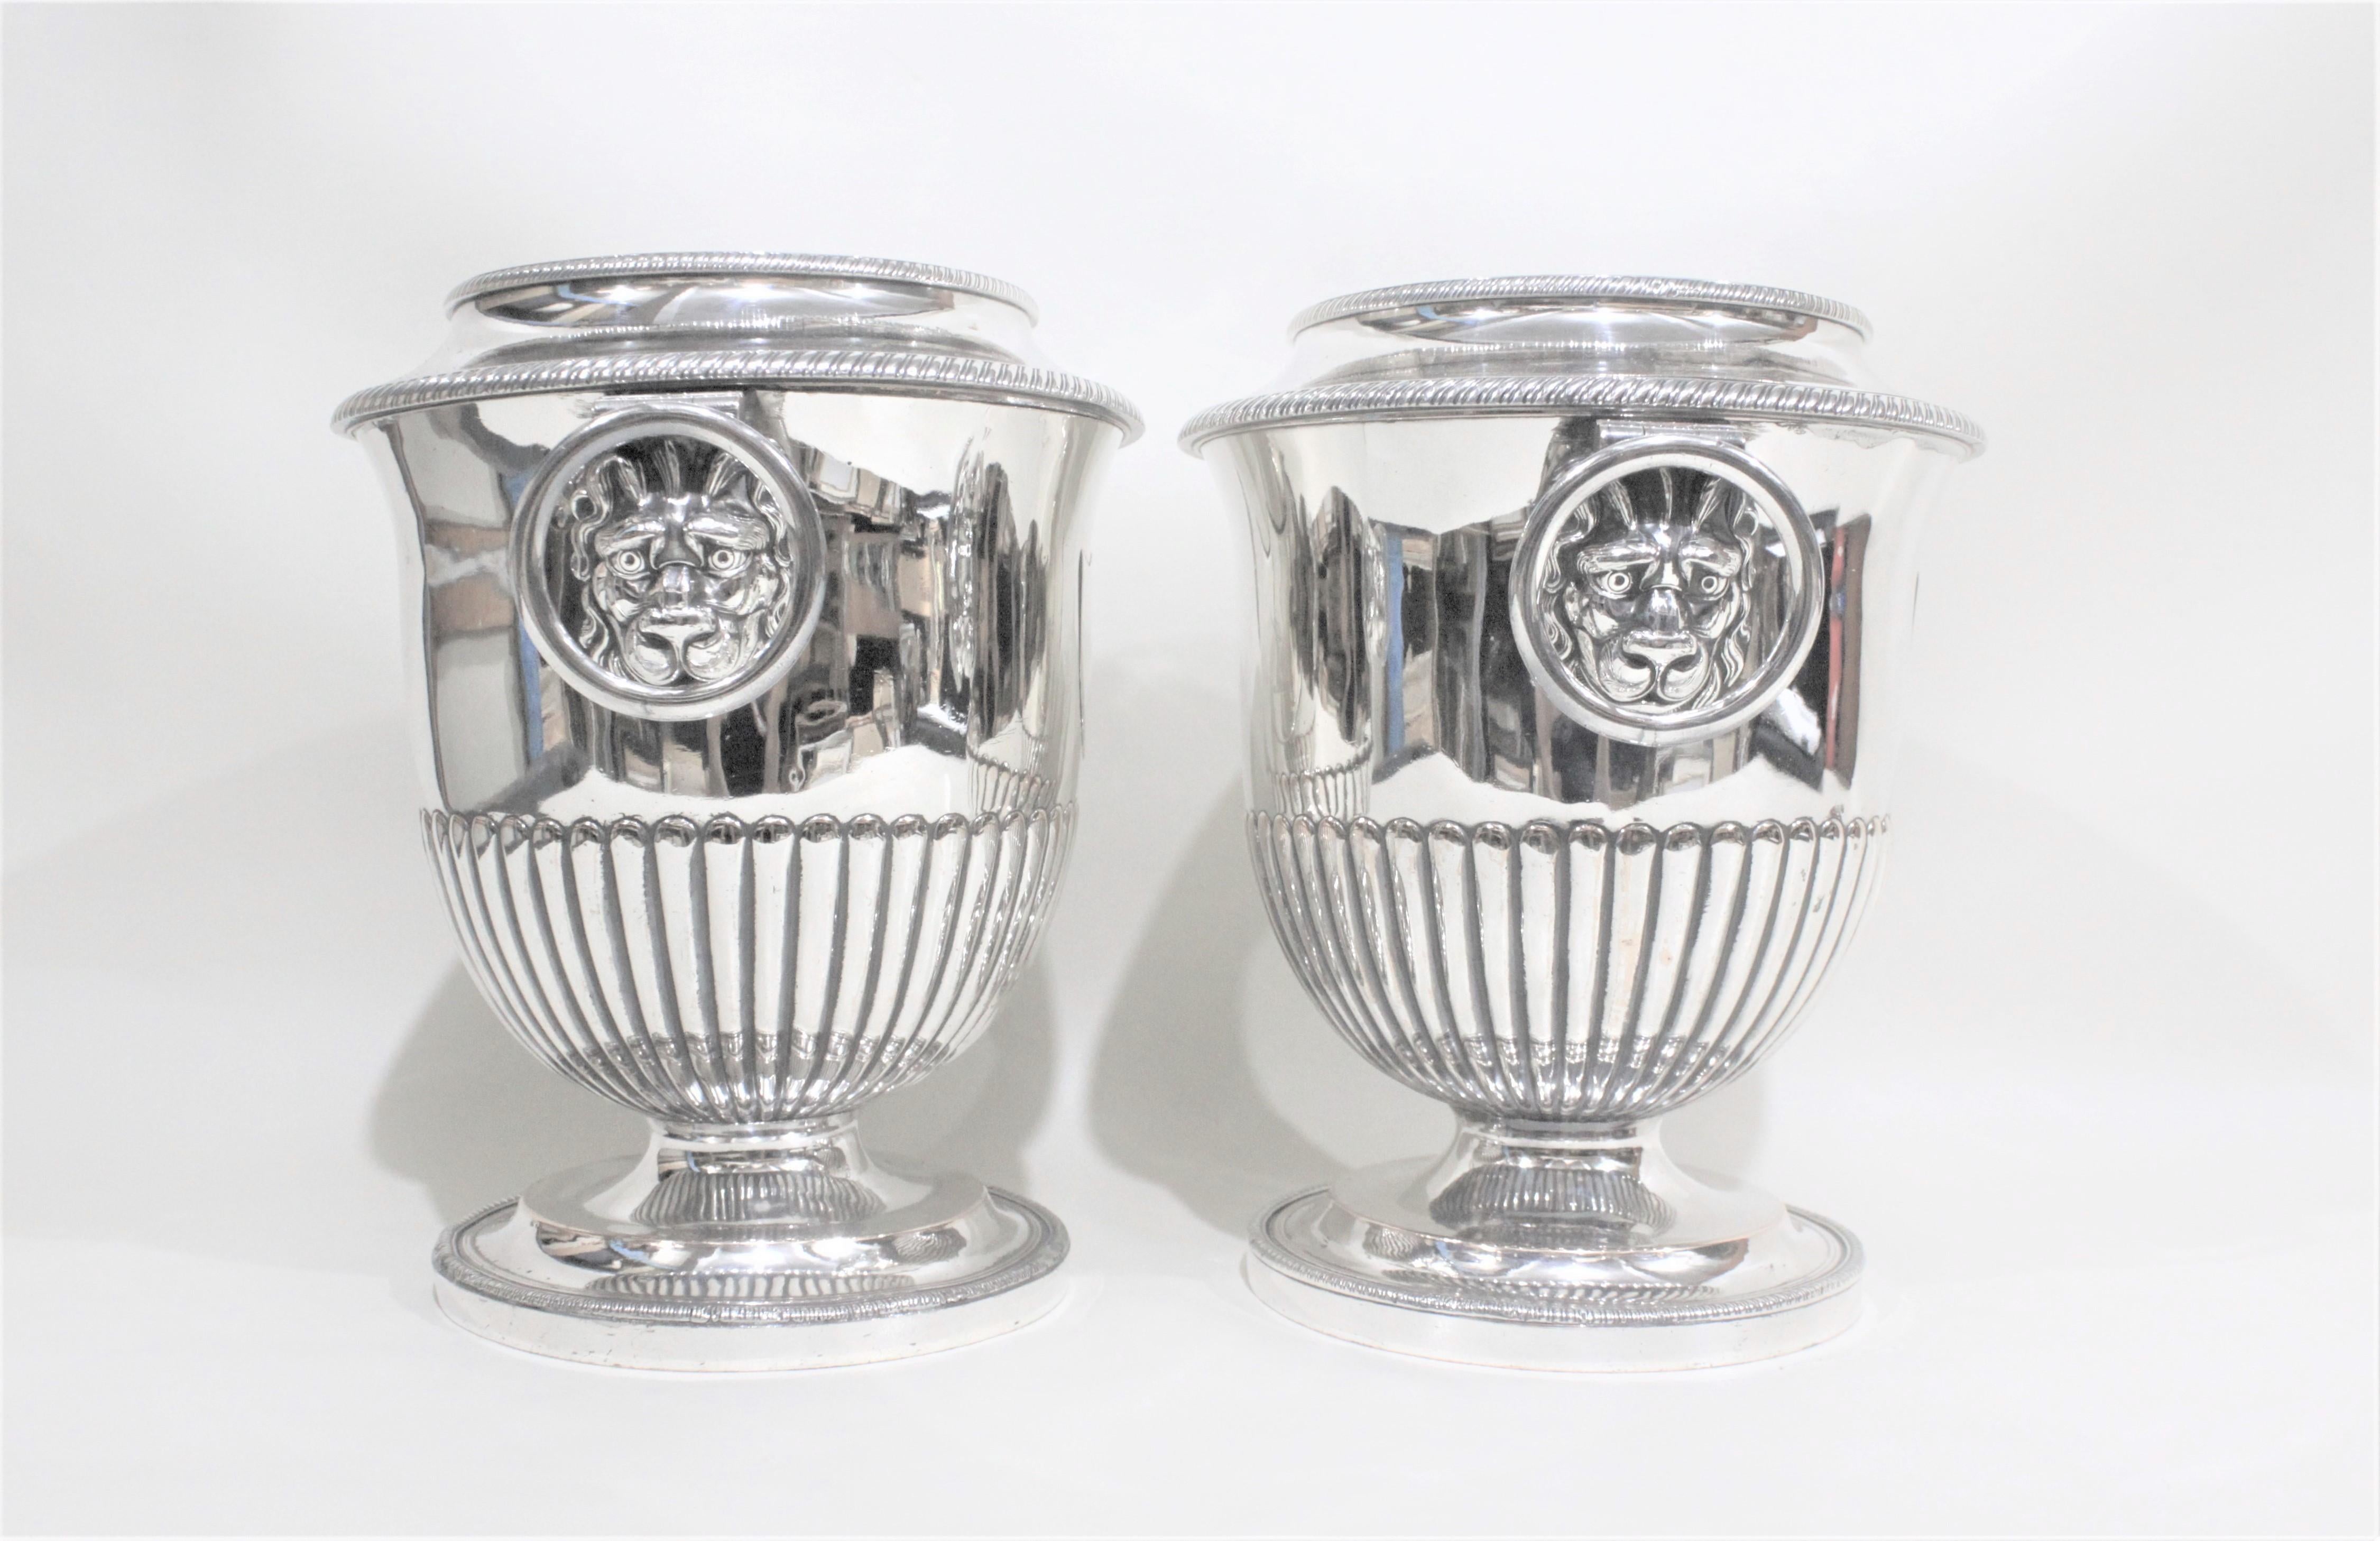 Pair of Antique Sheffield Regency Style Silver Plated Wine Coolers In Good Condition For Sale In Hamilton, Ontario